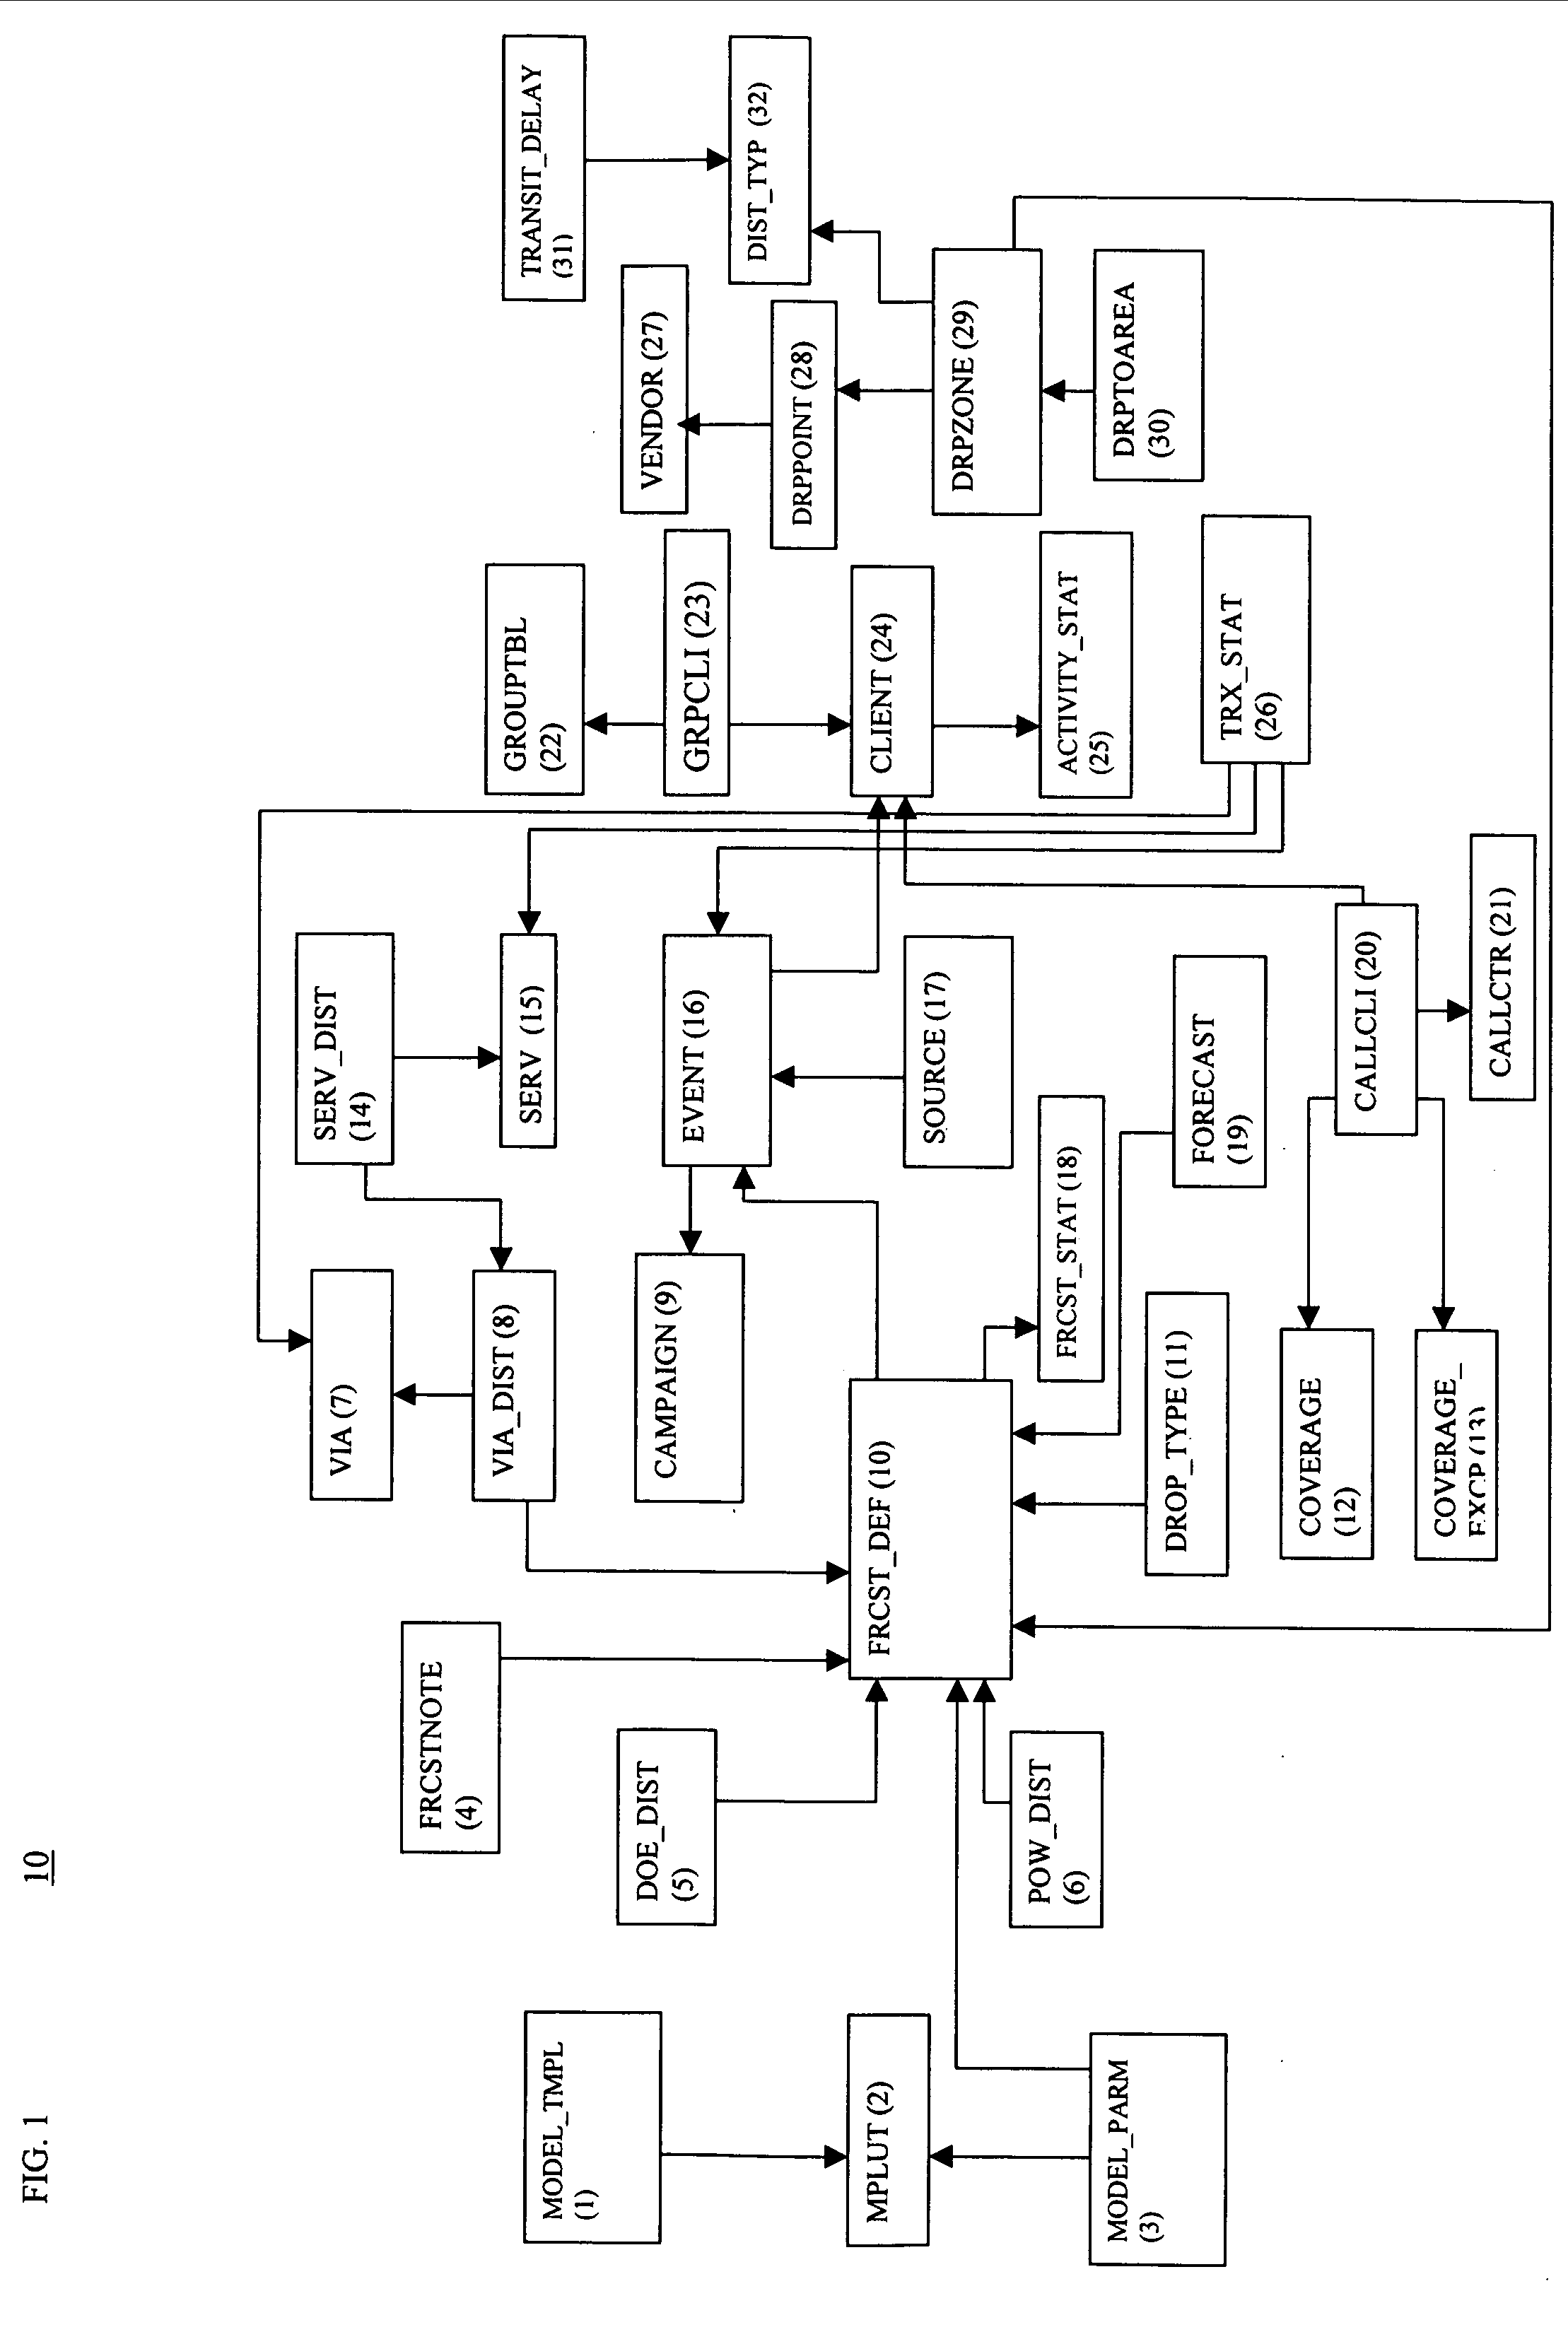 System and method for event-based forecasting